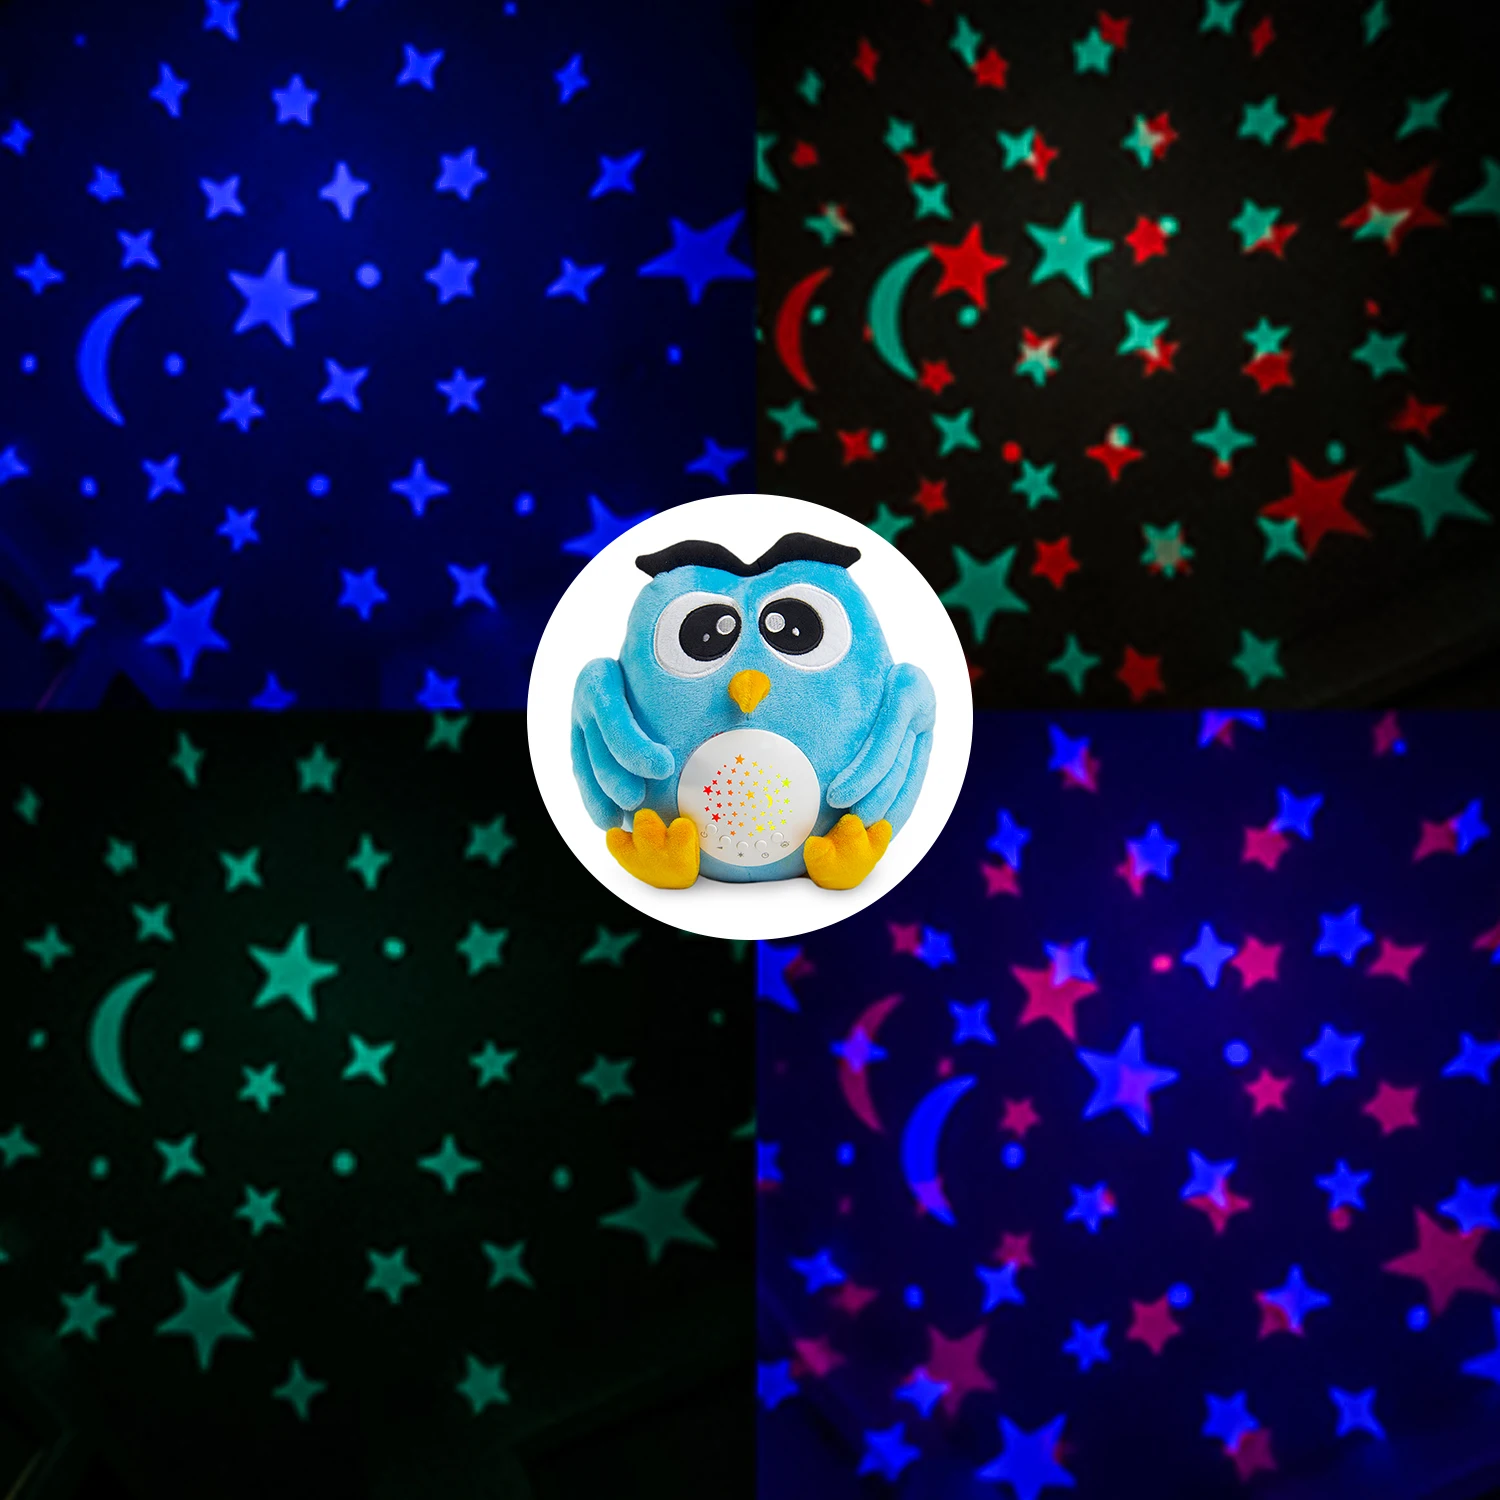 LED star projector stuffed owl baby white noise sound machine